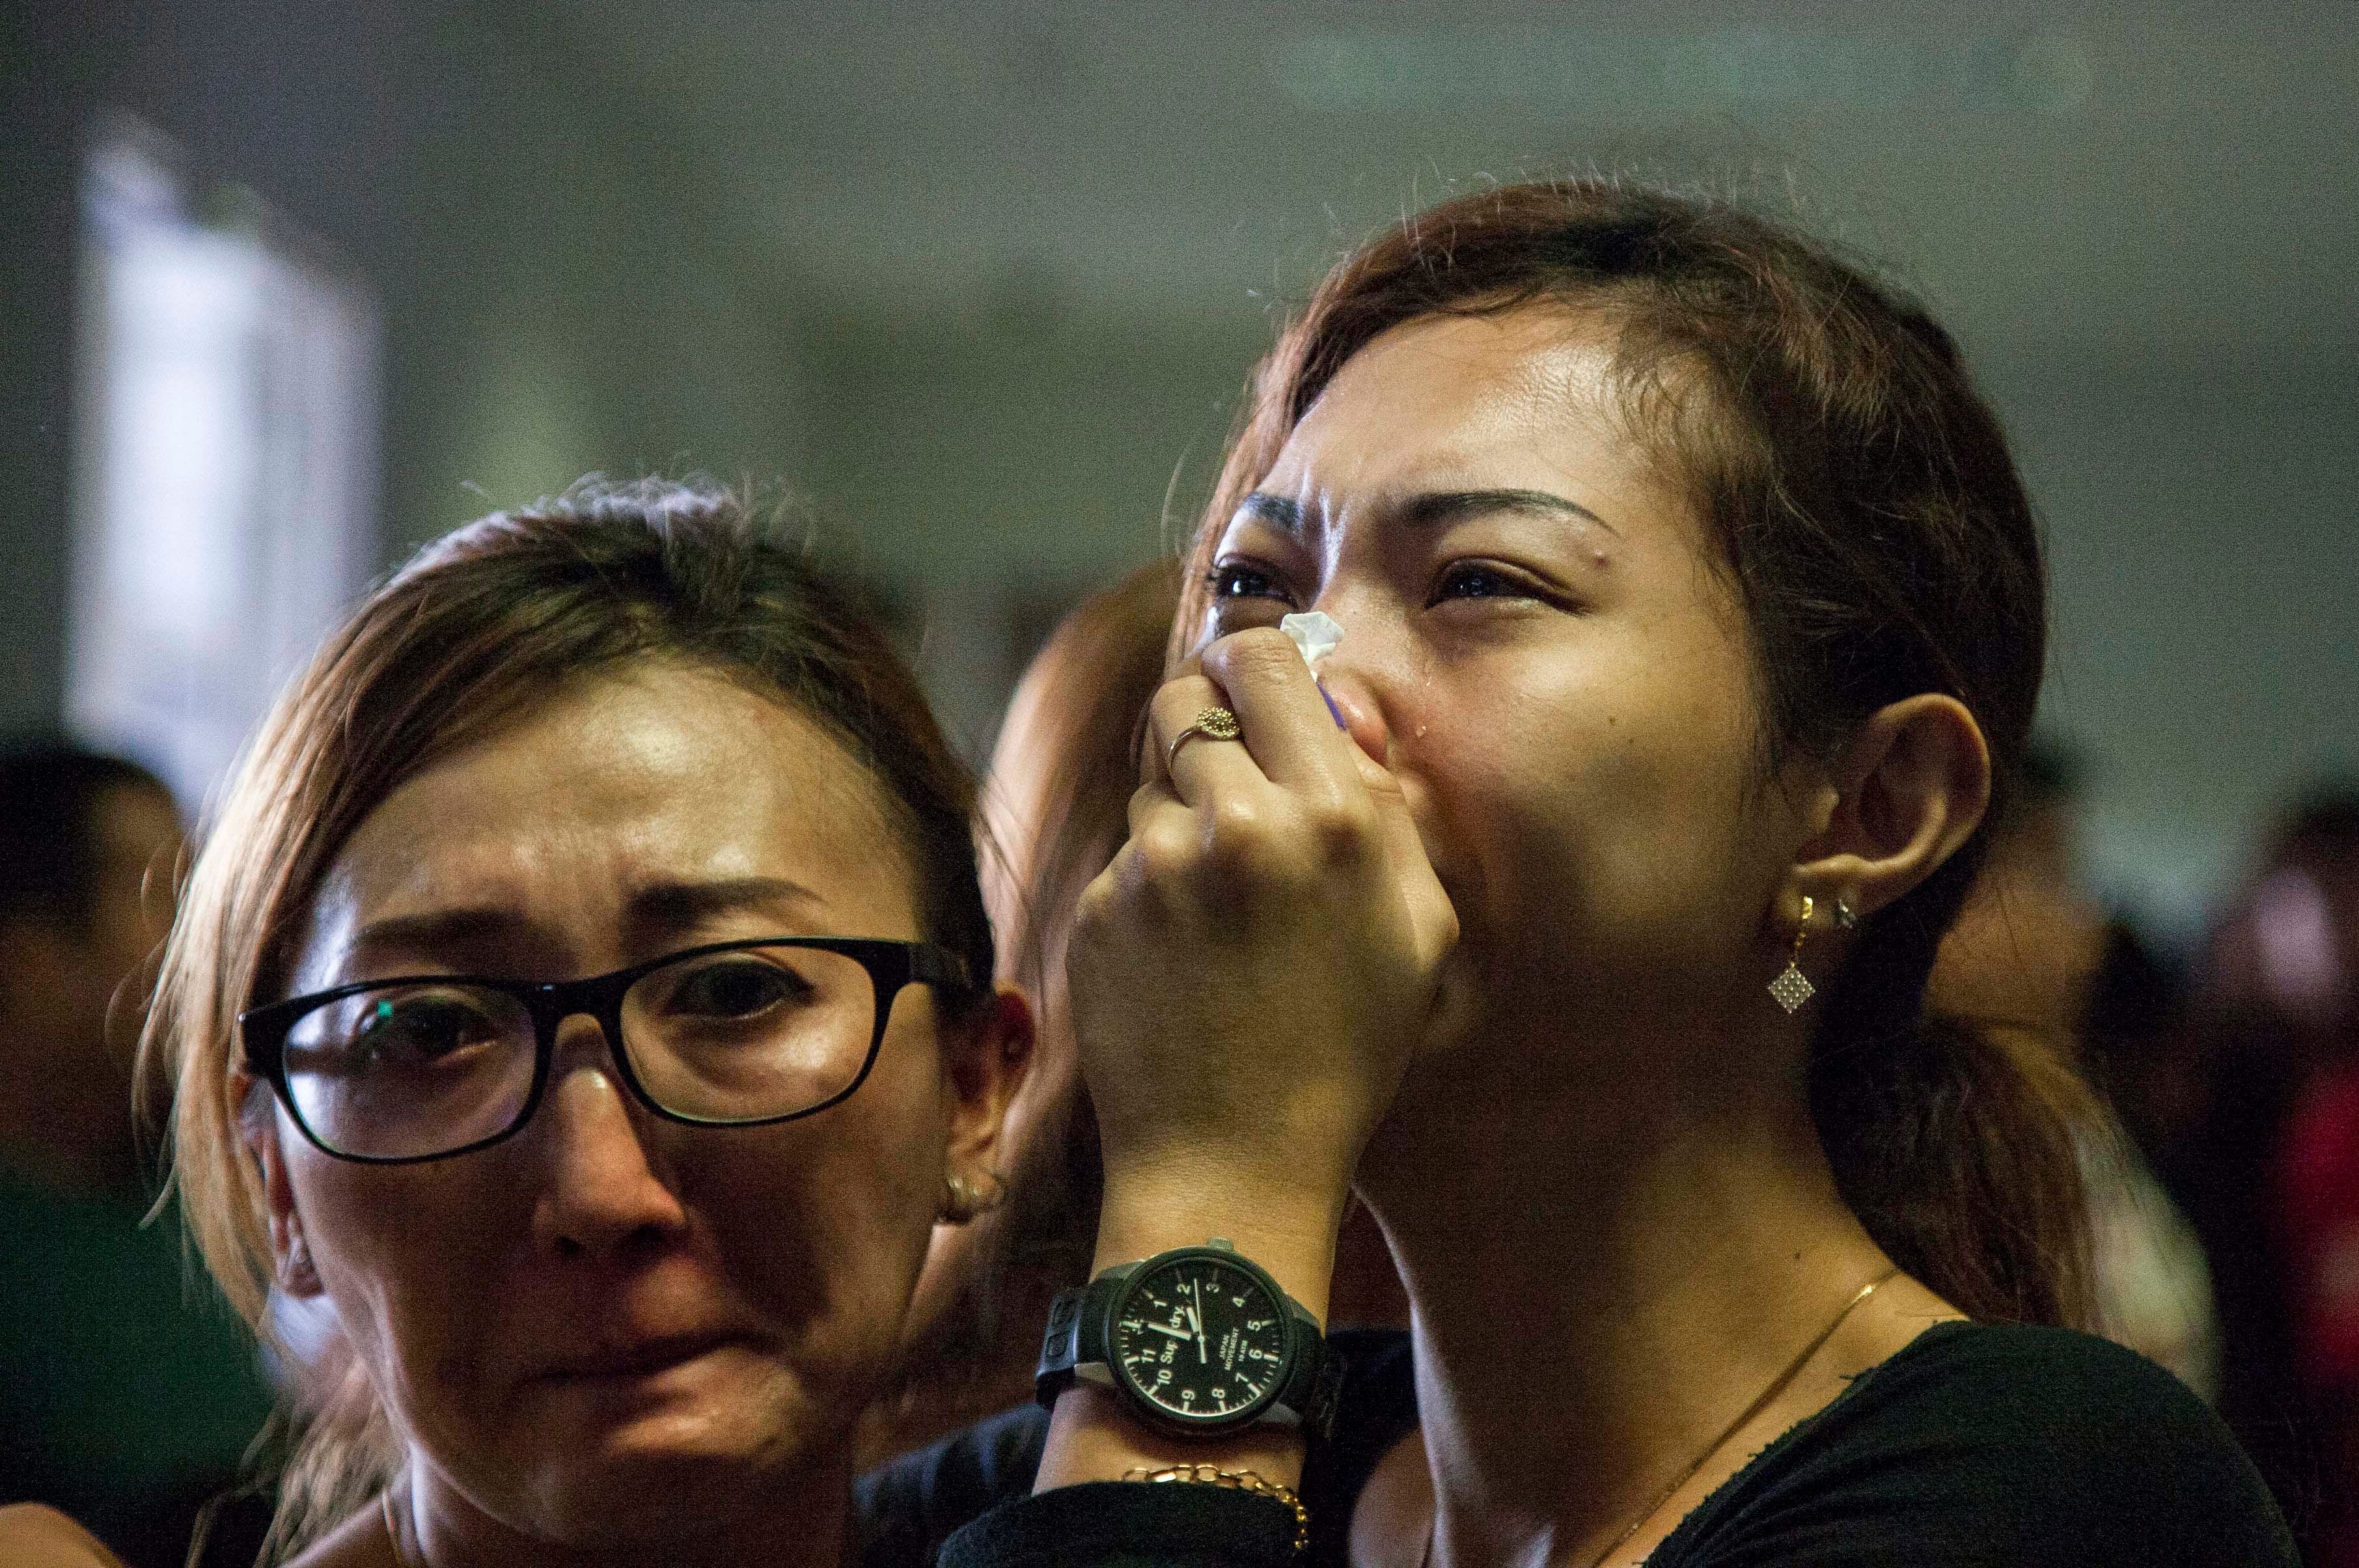 Search resumes for missing AirAsia flight